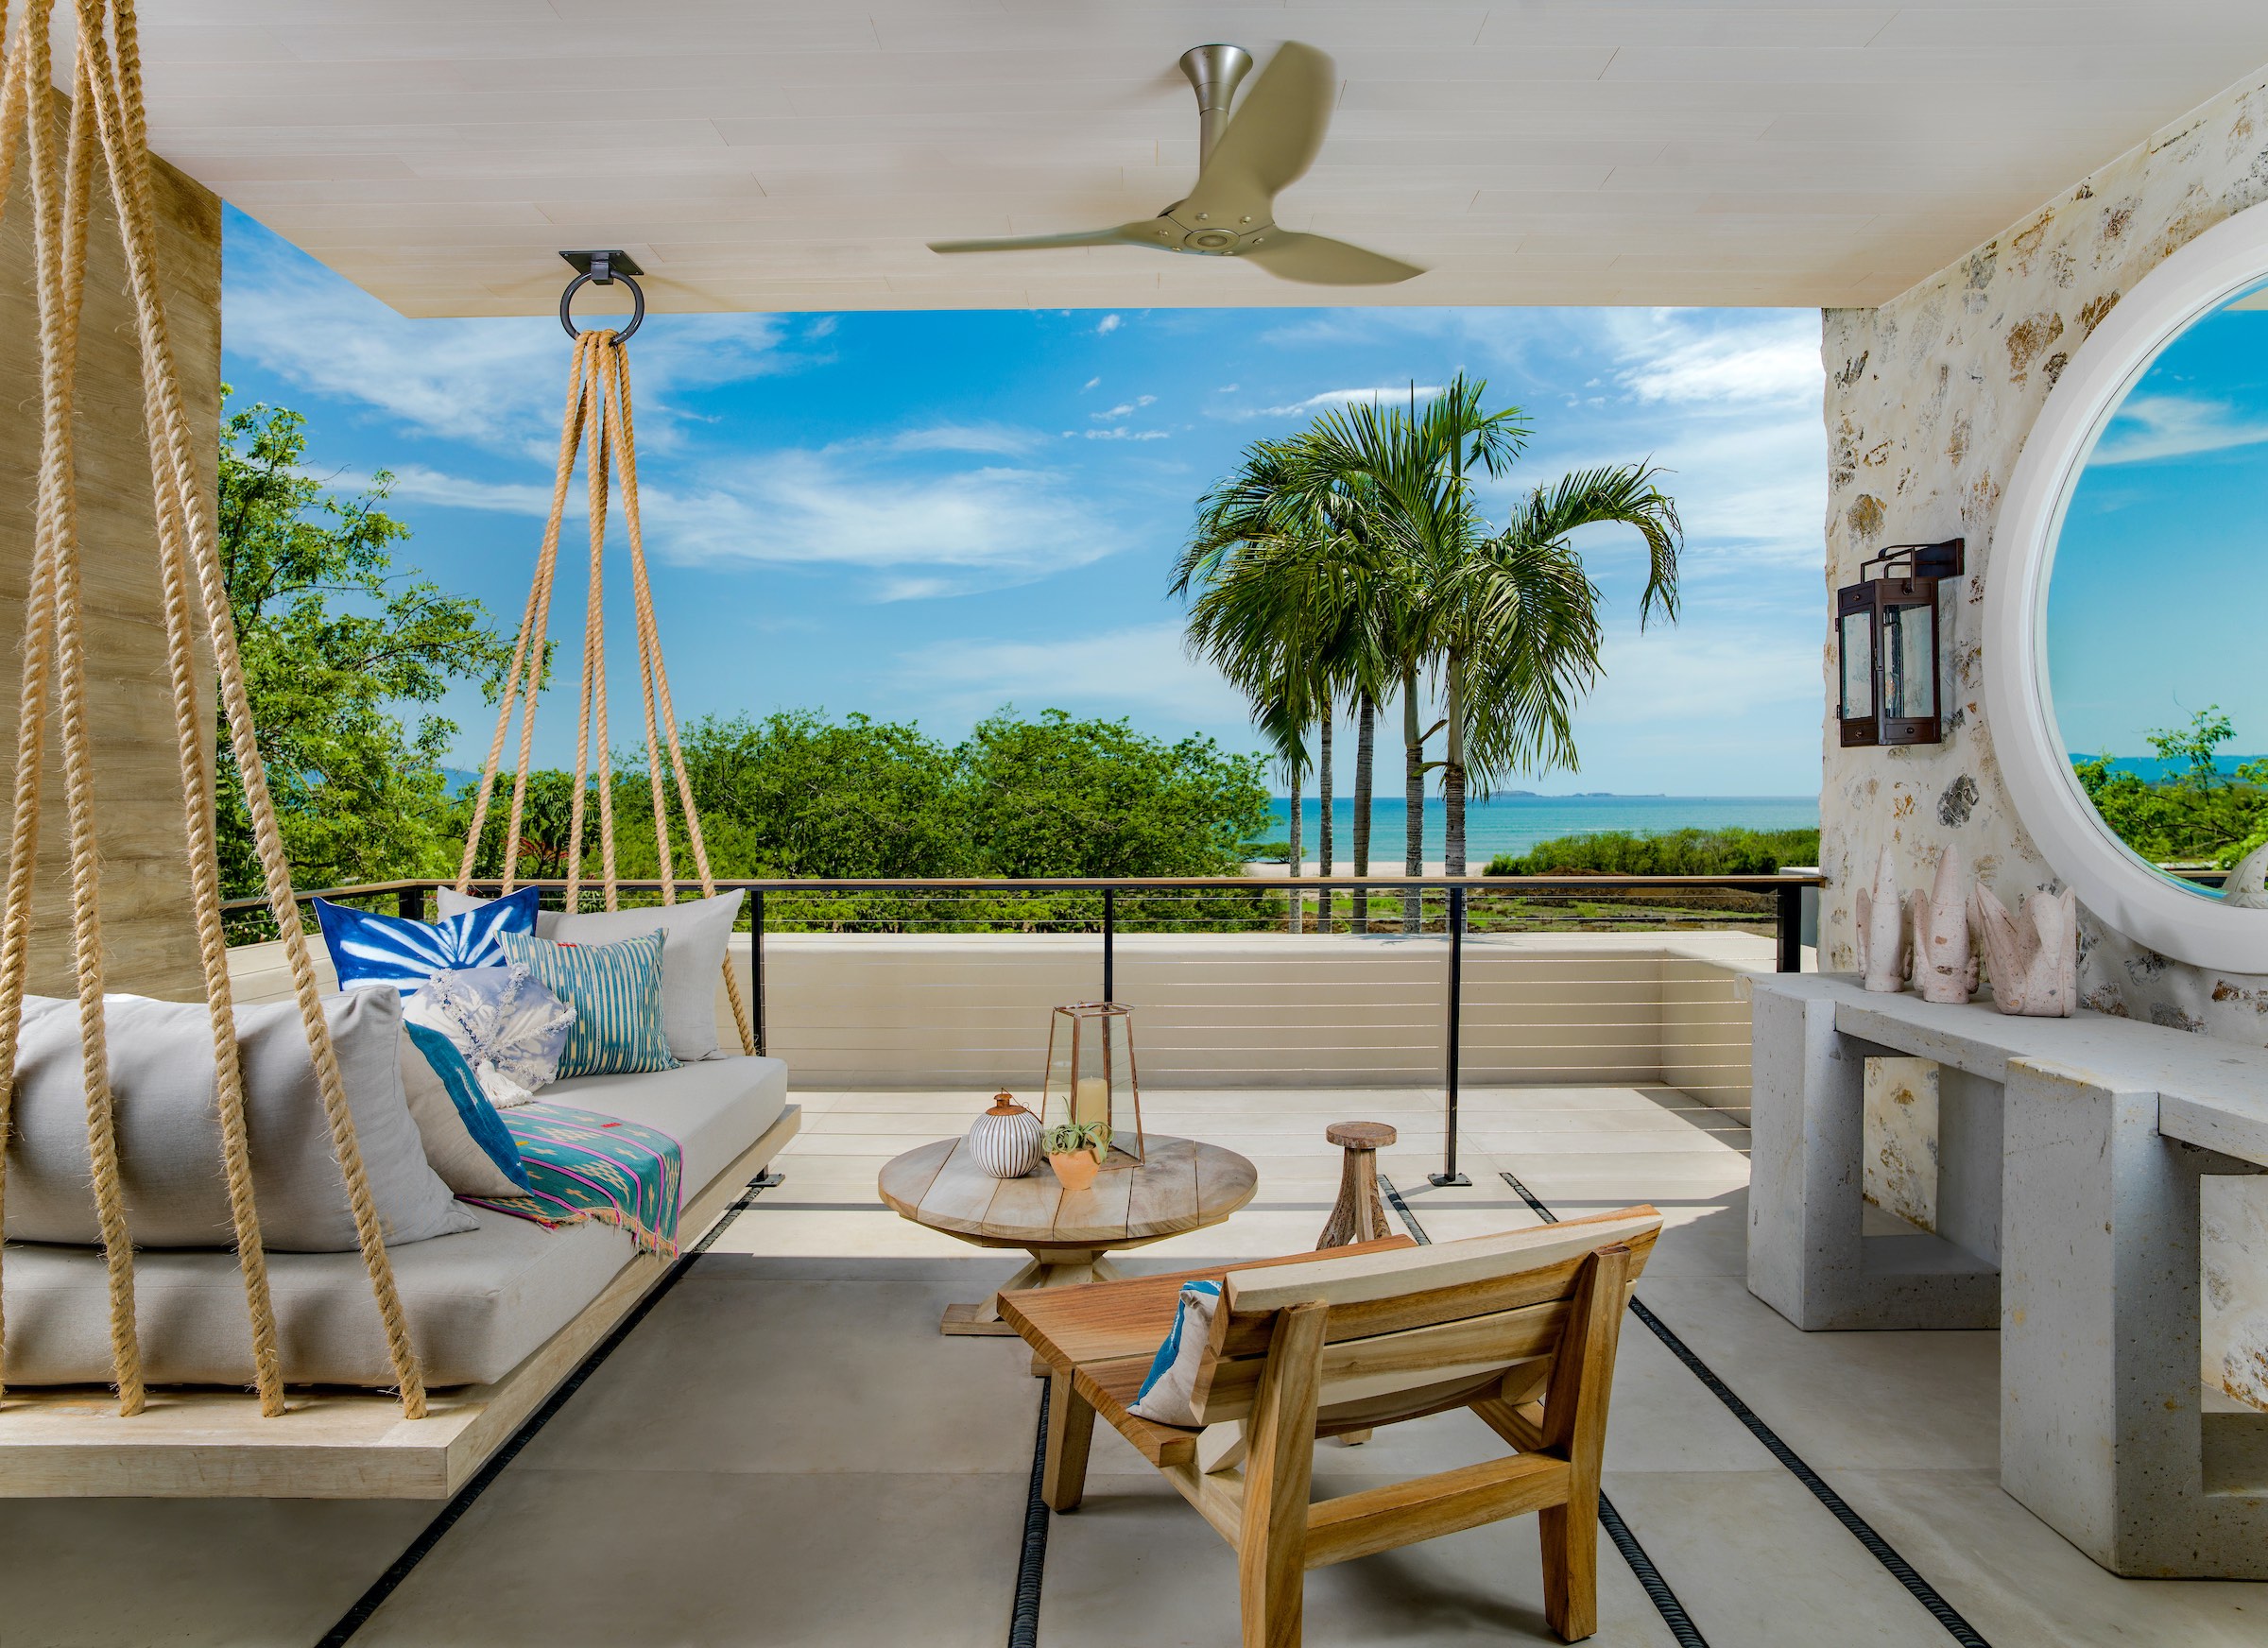 There, at Punta de Mita, developer Mark Cooley is putting the finishing touches on a series of villas and condos that cascade down a six-degree slope of tropical jungle toward pristine waters.